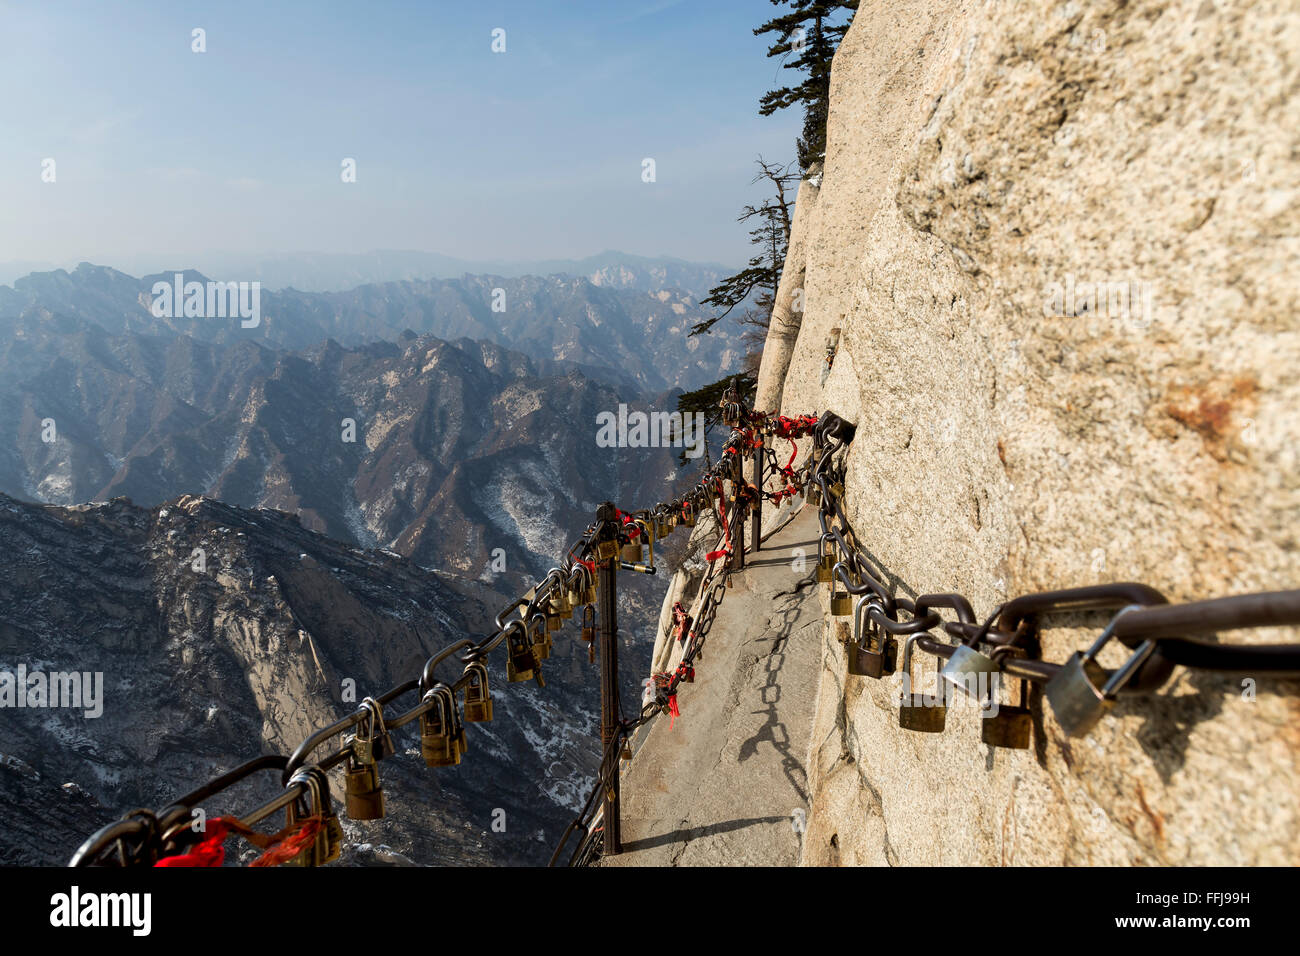 Huashan Mountain, view from the Danger Trail, China. Stock Photo